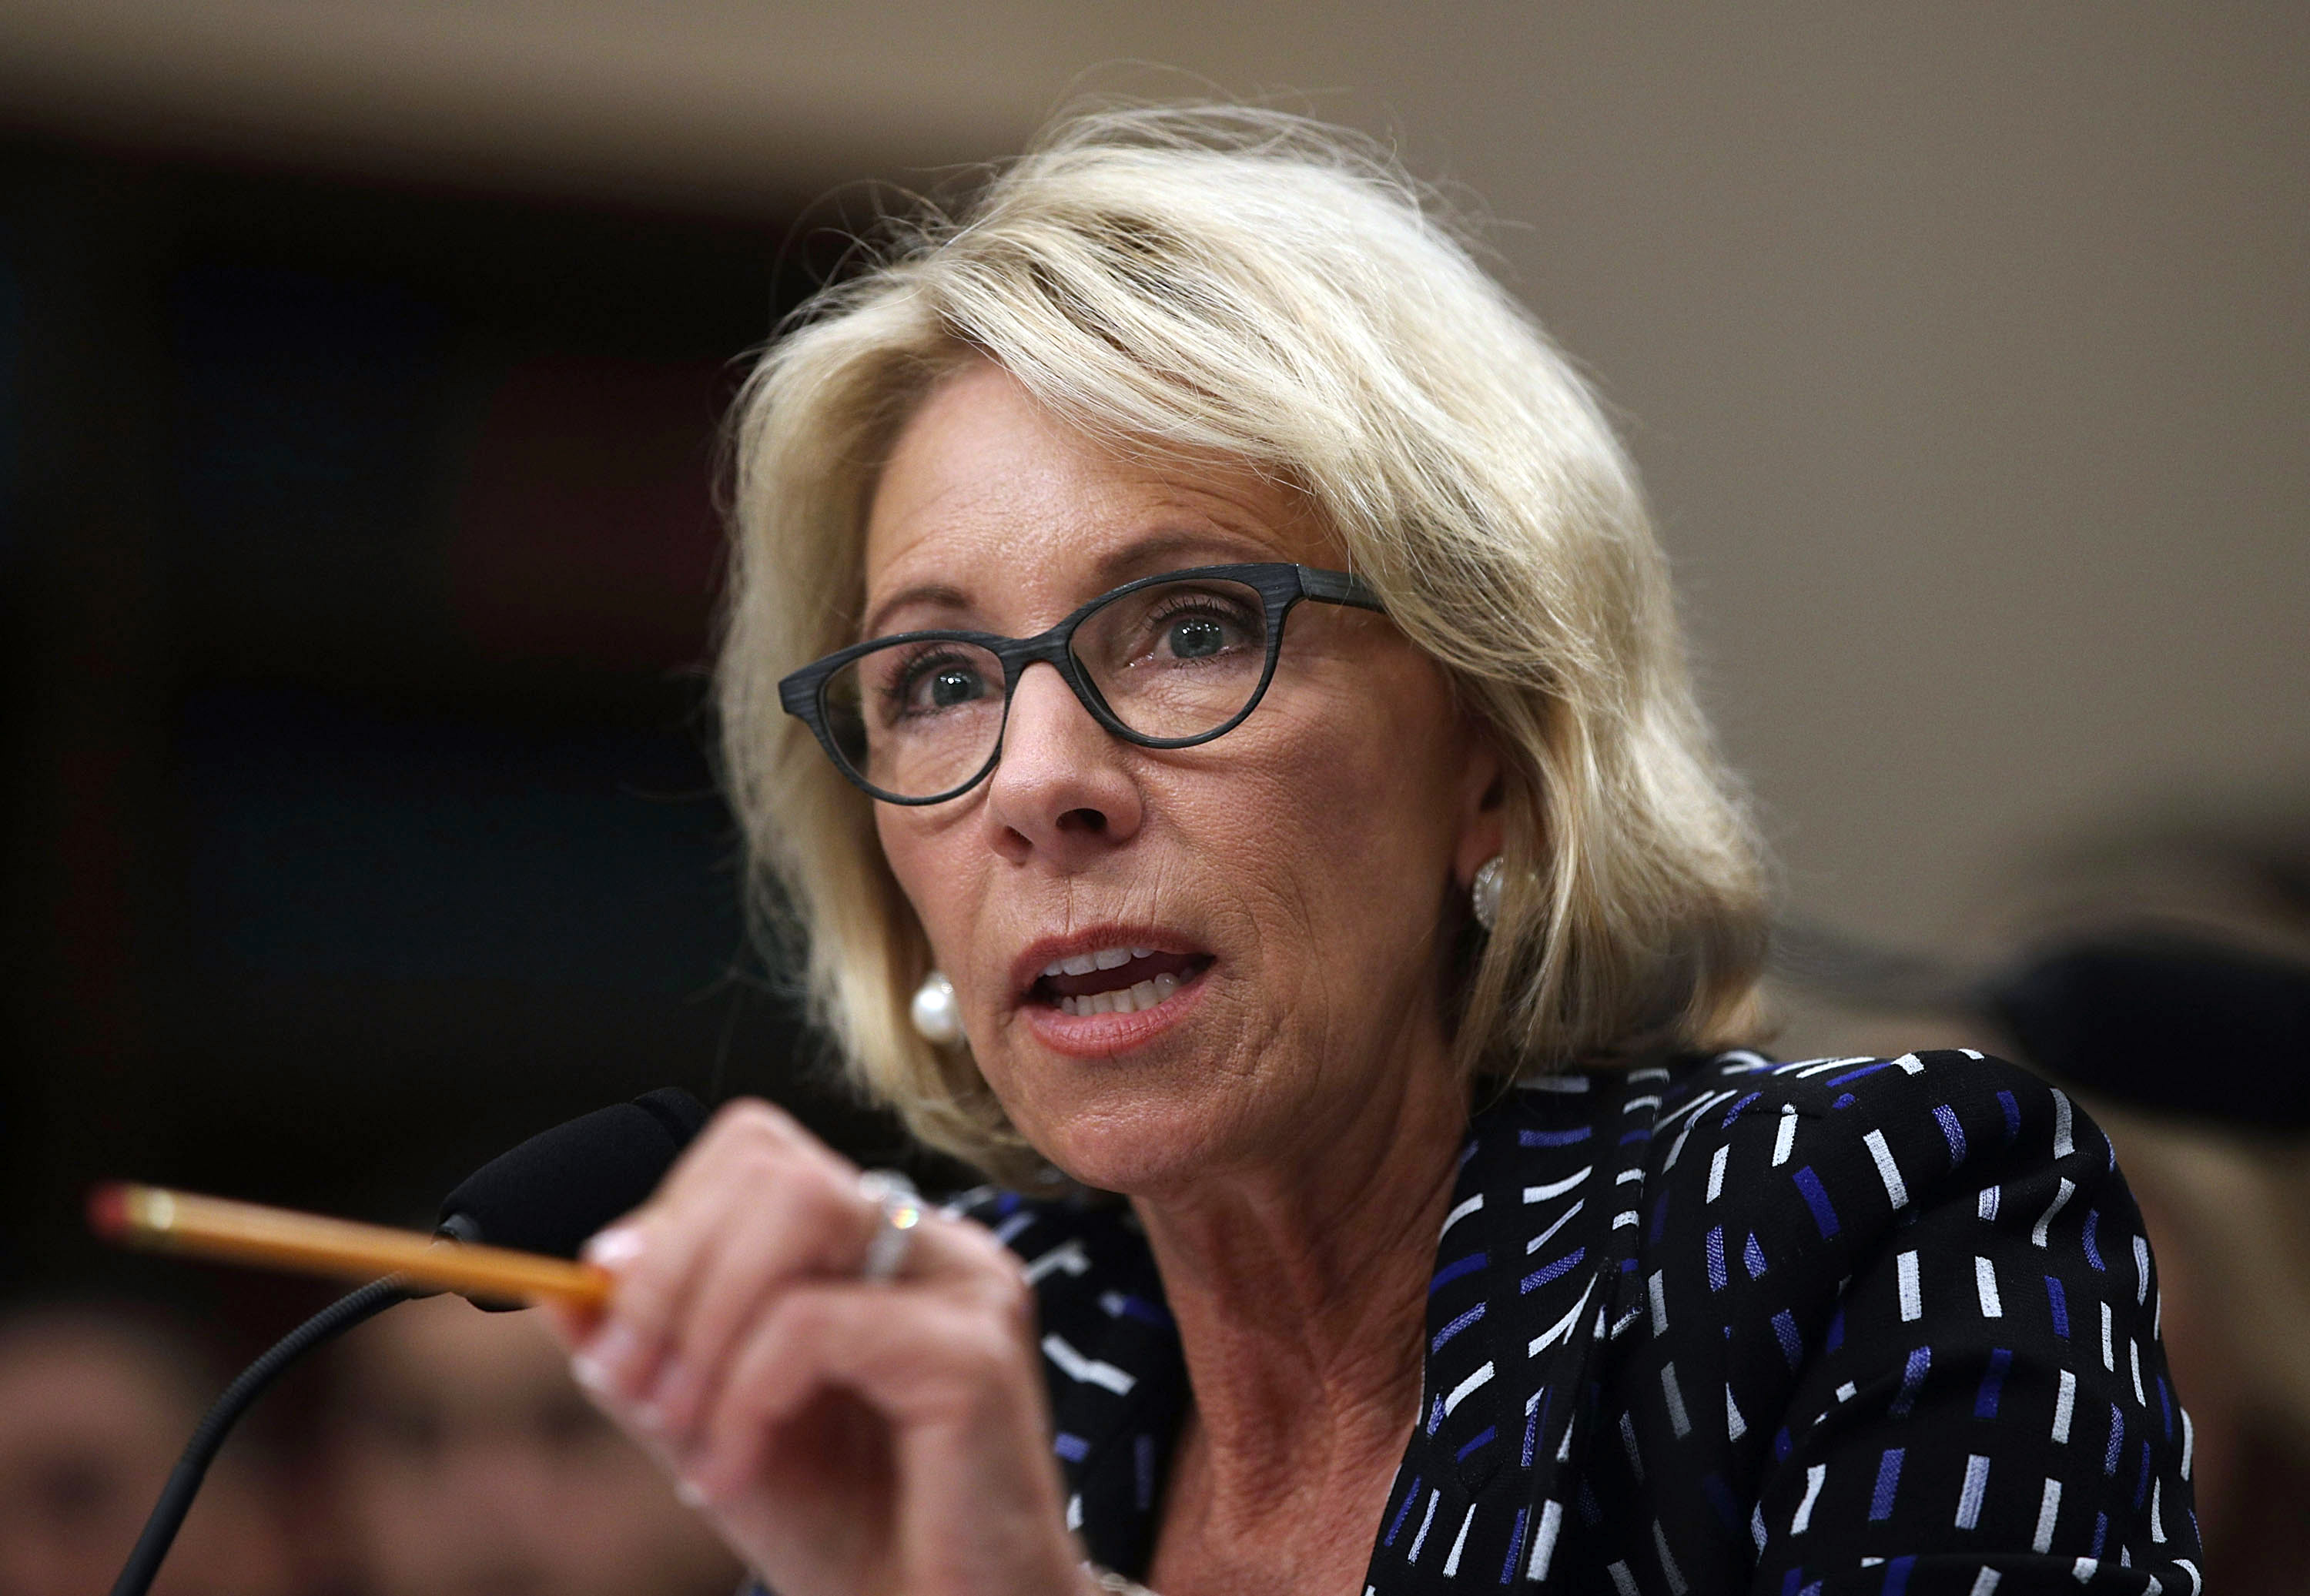 Secretary of Education Betsy DeVos testifies during a hearing before the Labor, Health and Human Services, Education and Related Agencies subcommittee of the House Appropriations Committee on May 24, 2017 on Capitol Hill. (Alex Wong/Getty Images)